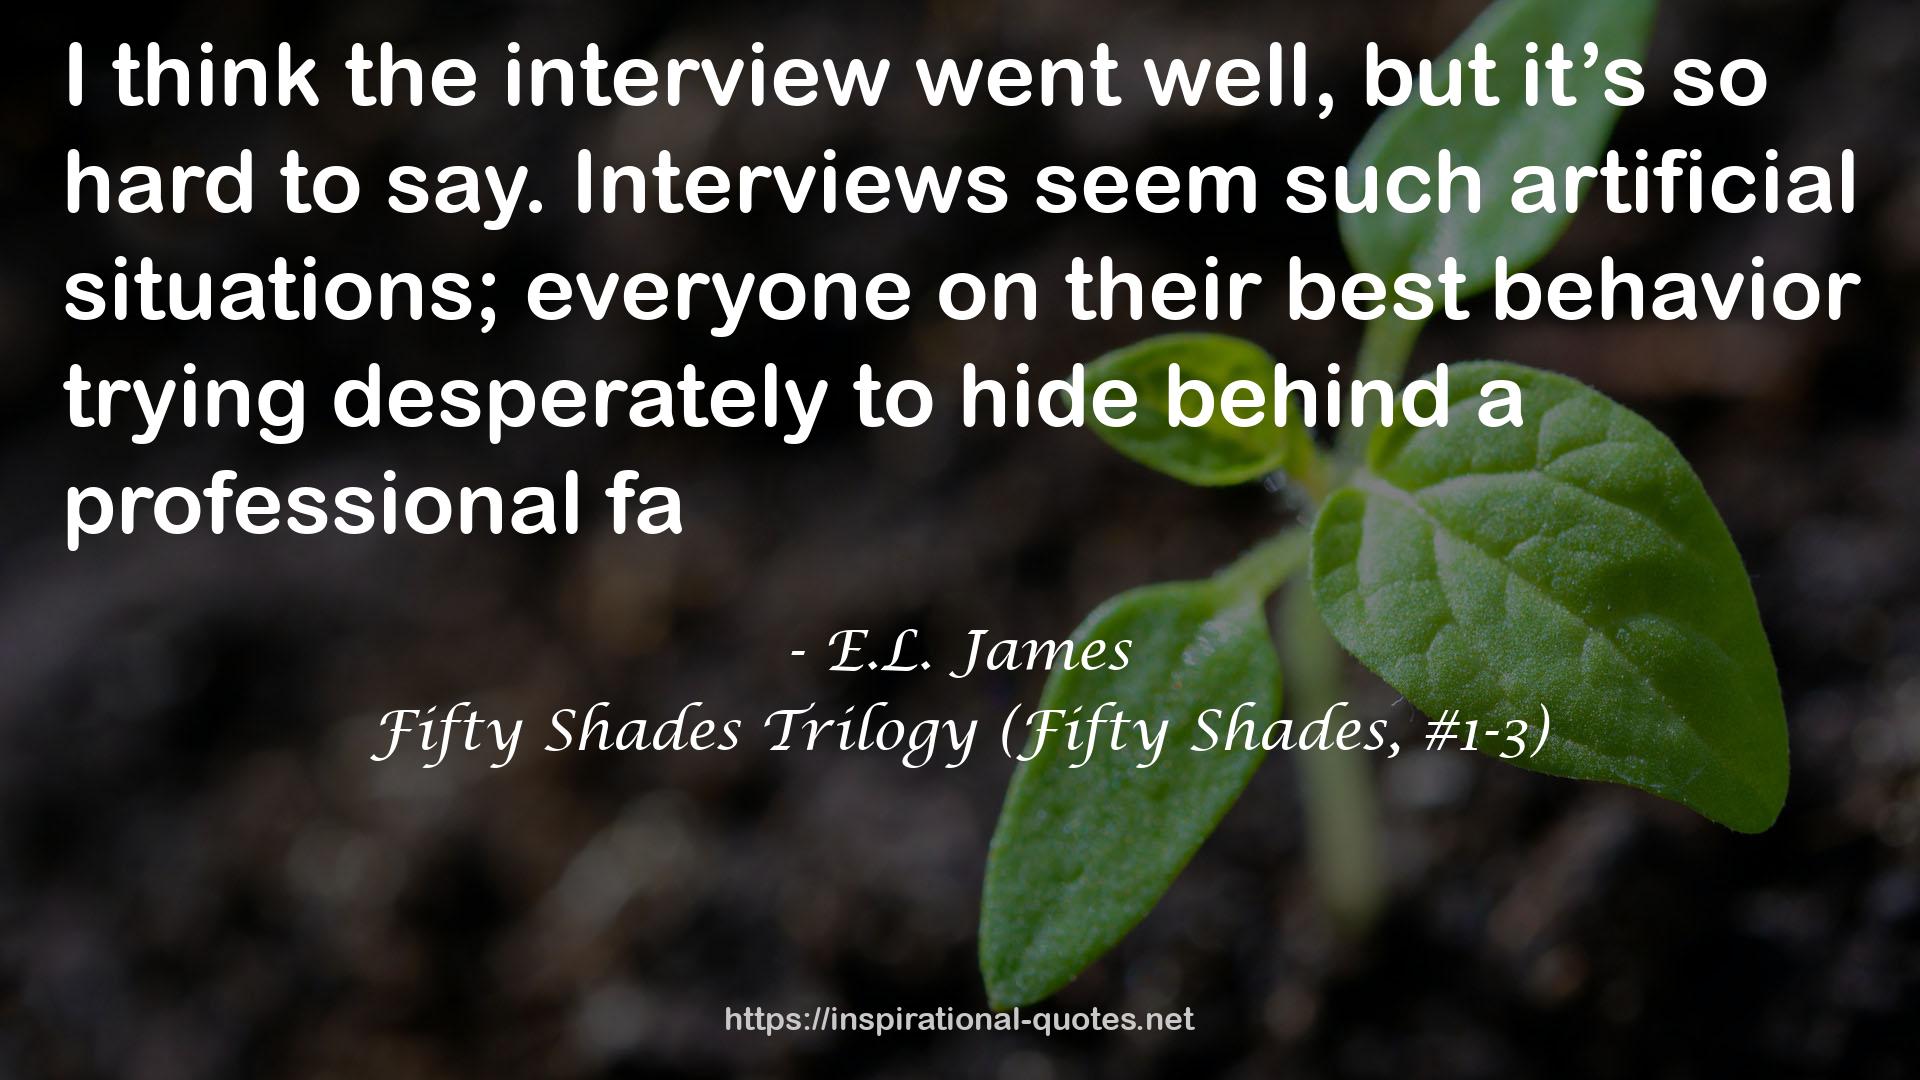 Fifty Shades Trilogy (Fifty Shades, #1-3) QUOTES